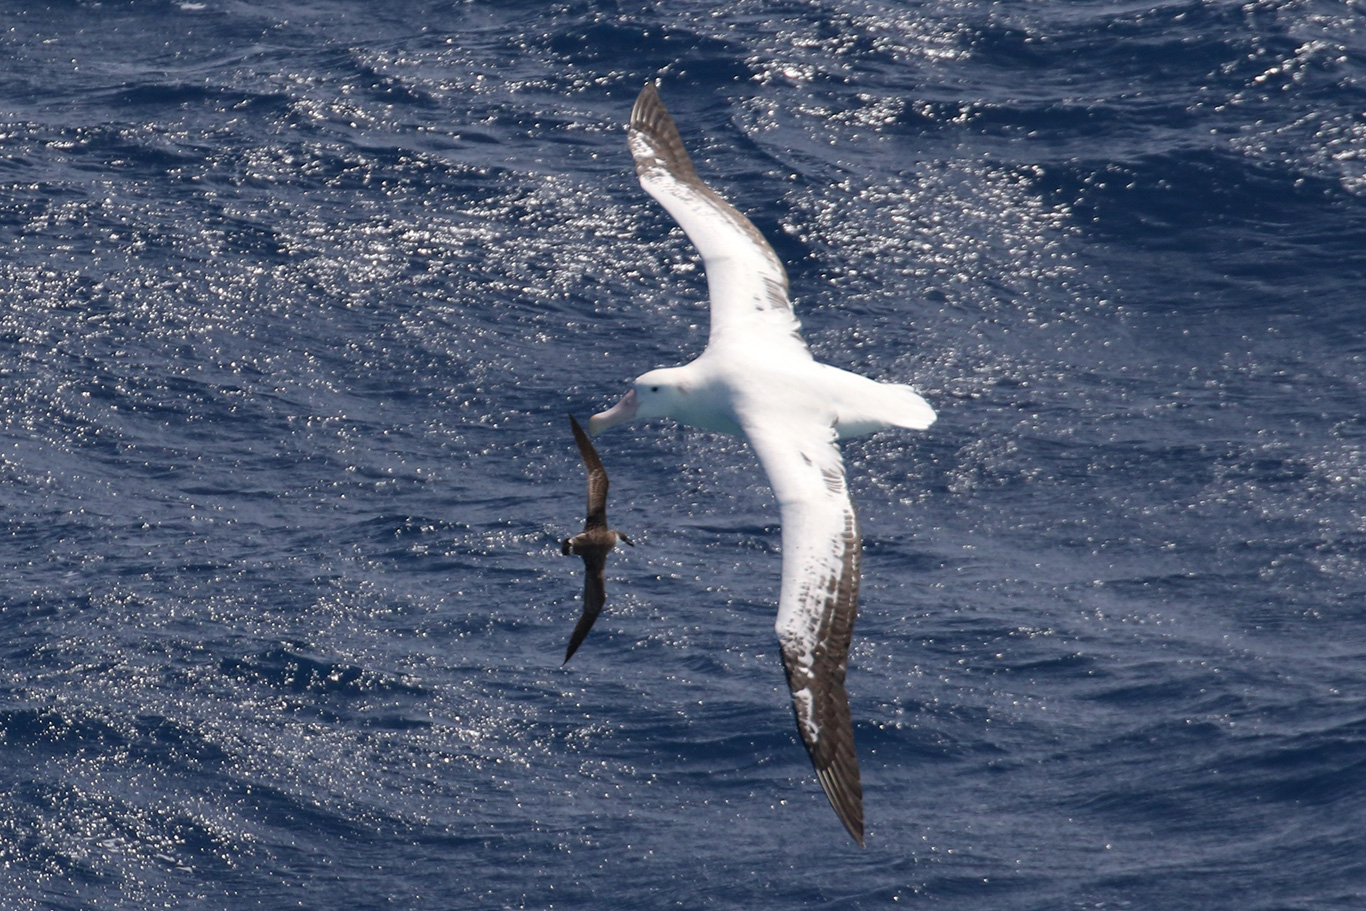  Great Shearwater and Wandering Albatross, At sea, c. 600km east of Argentina, north of The Falklands, South Atlantic Ocean.